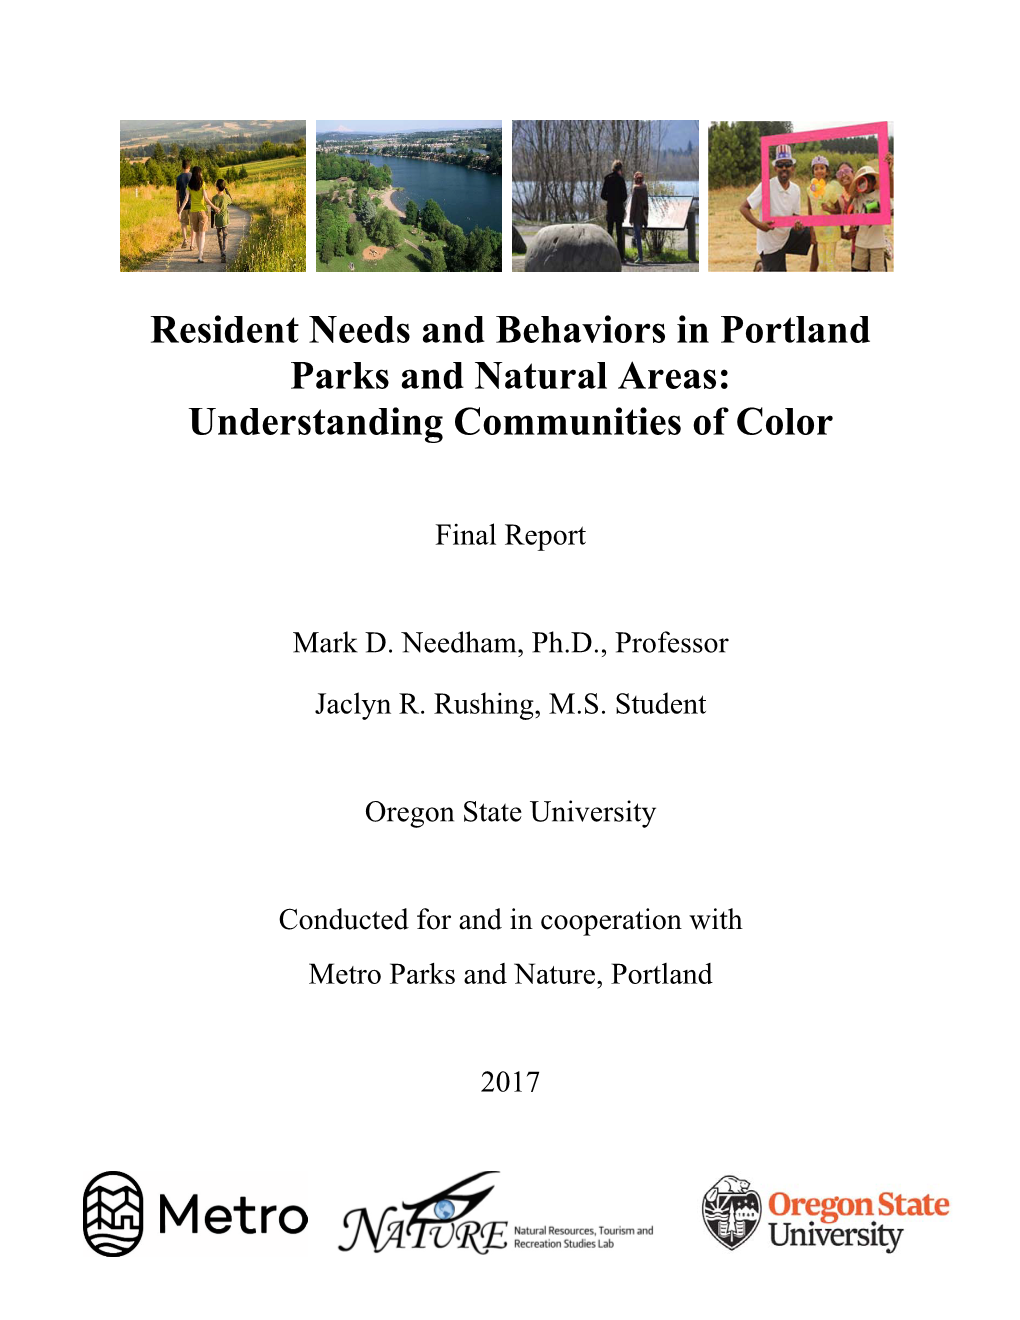 Resident Needs and Behaviors in Portland Parks and Natural Areas: Understanding Communities of Color